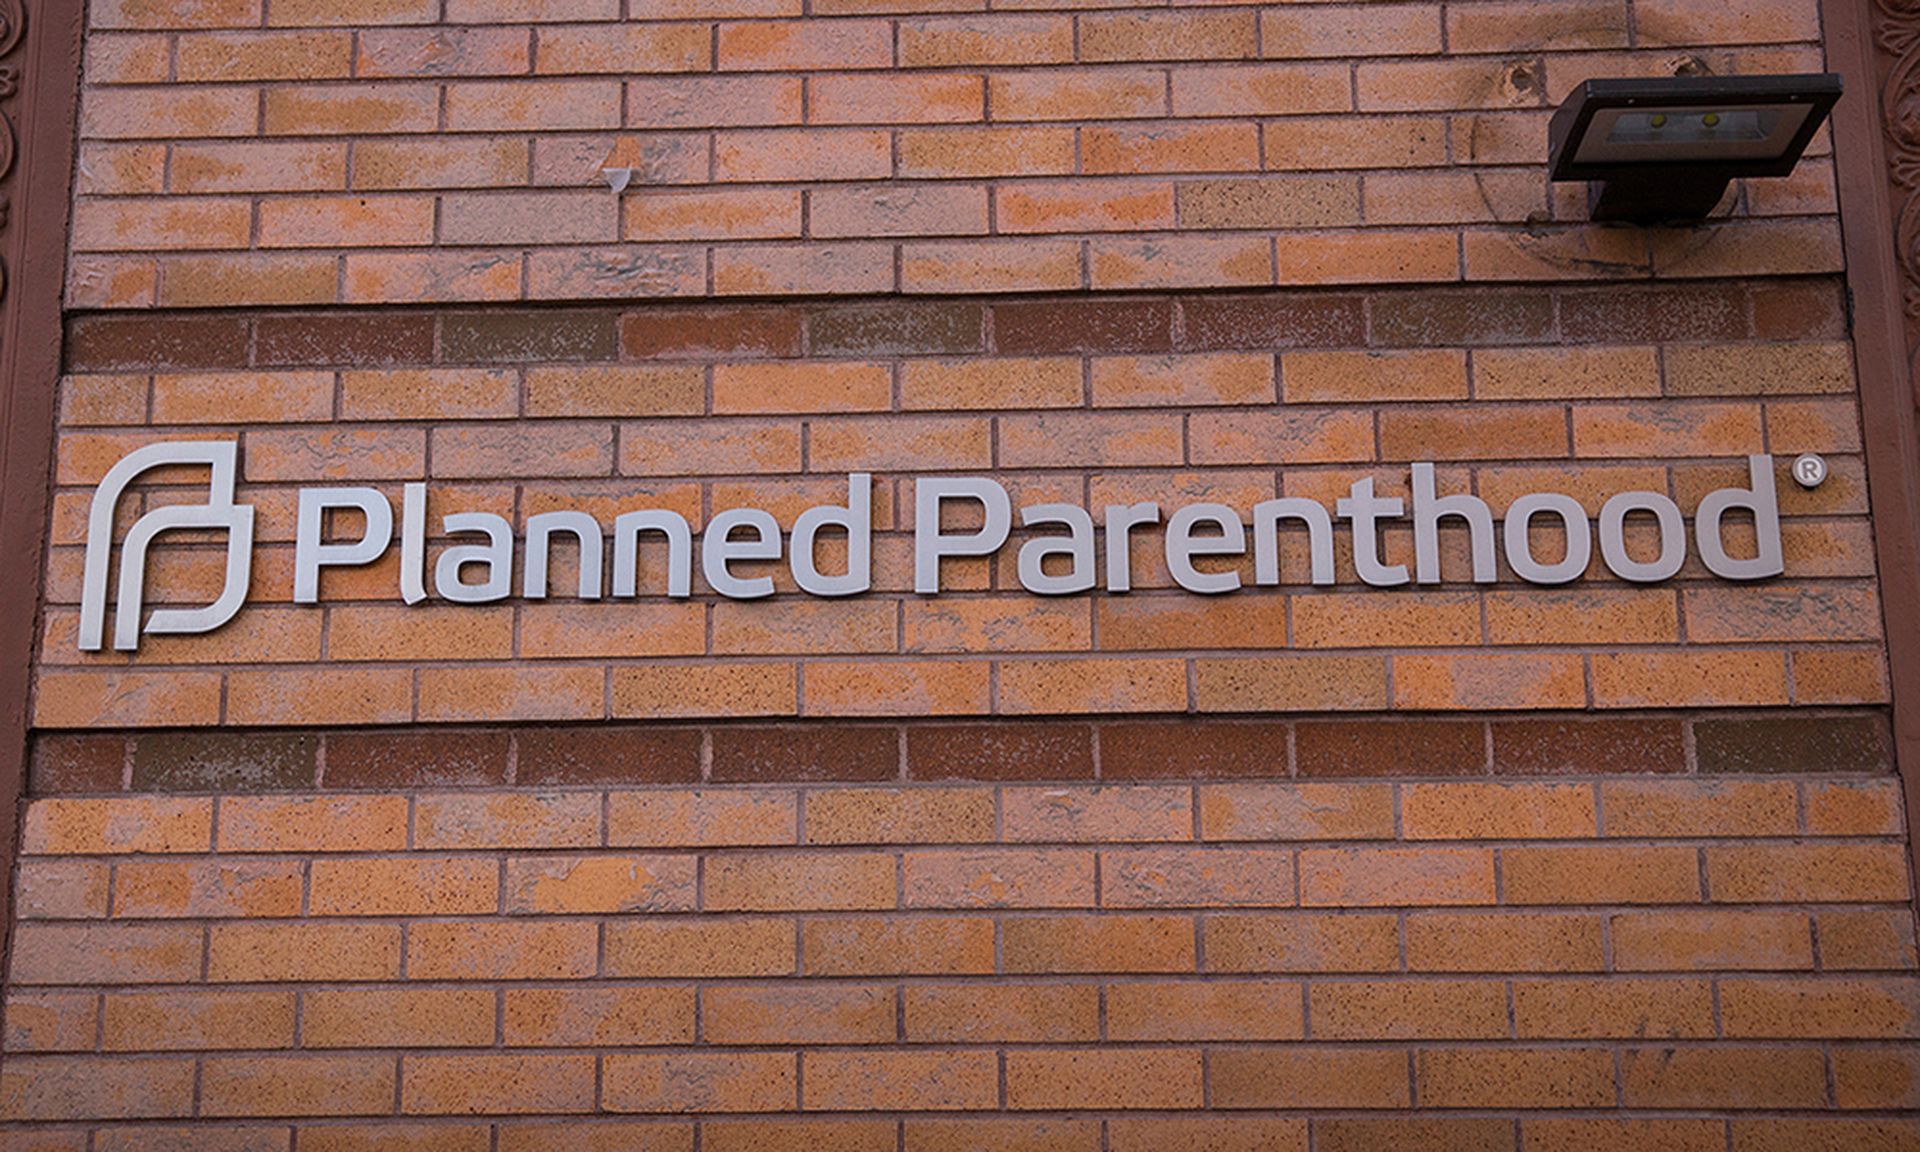 A Planned Parenthood office is seen on Nov. 30, 2015, in New York City. (Photo by Andrew Burton/Getty Images)